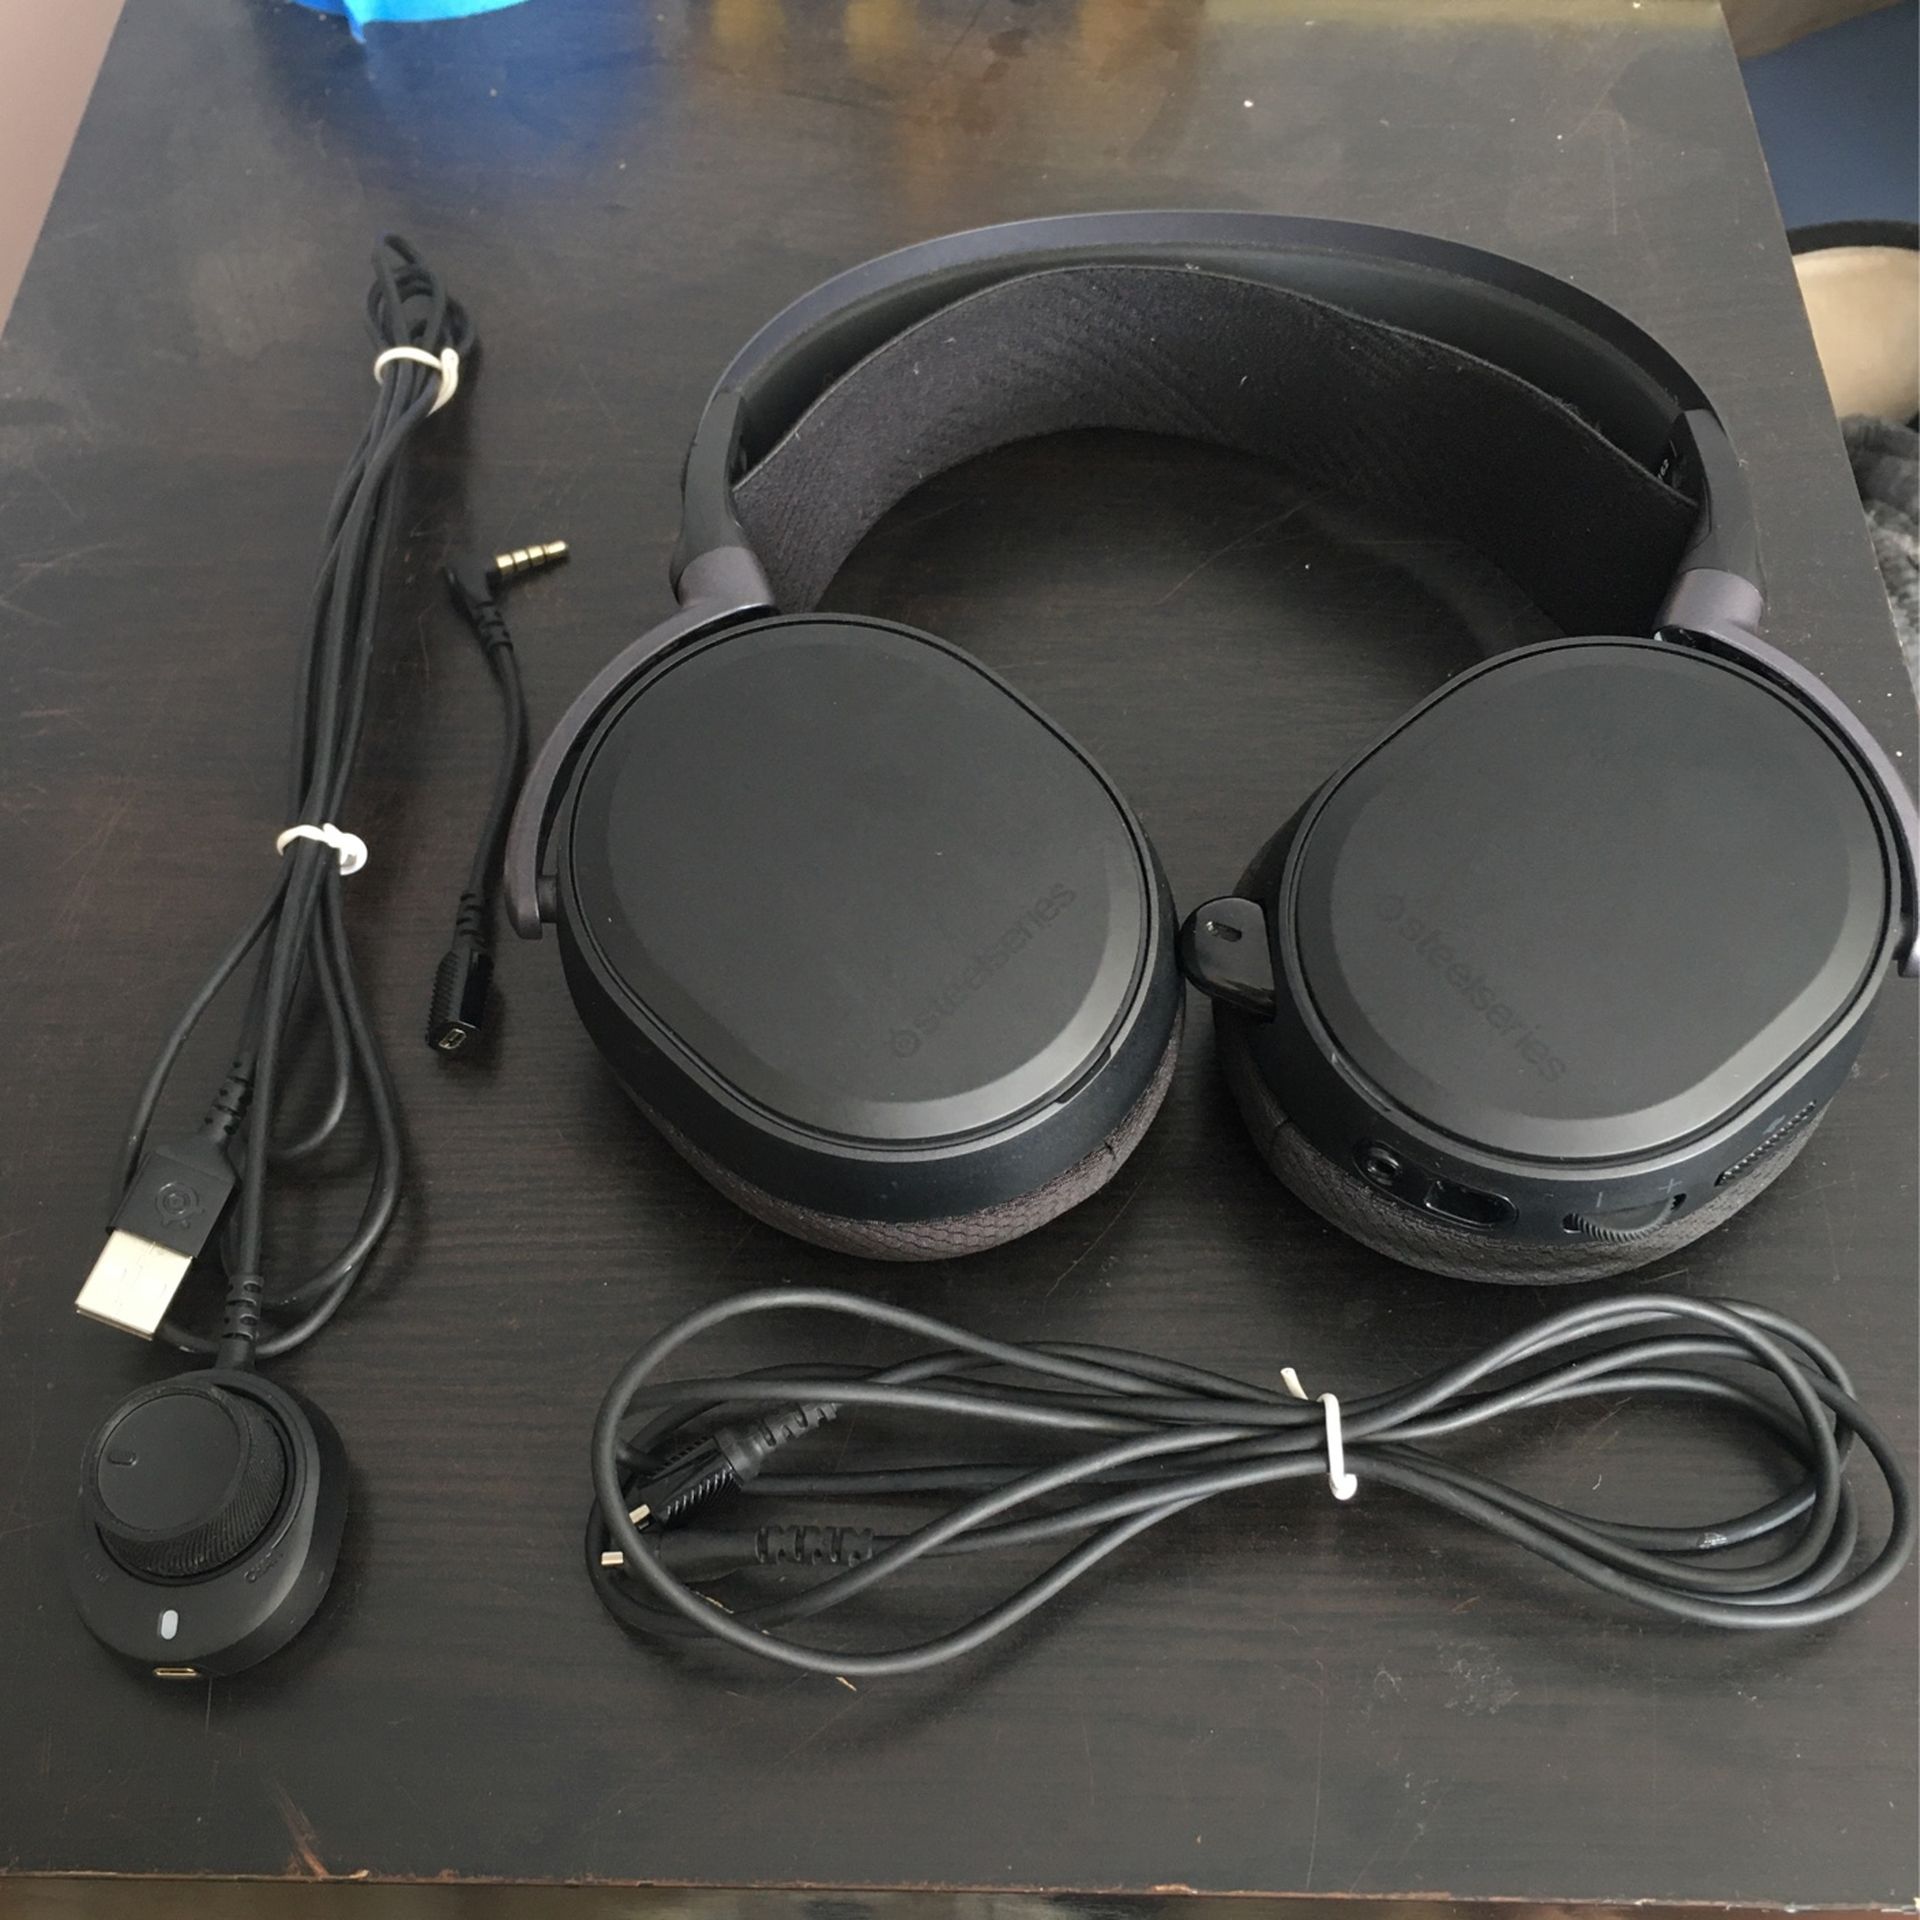 Steelseries Artics 9 Wired Gaming Headset With Adapter And Audio Controller 